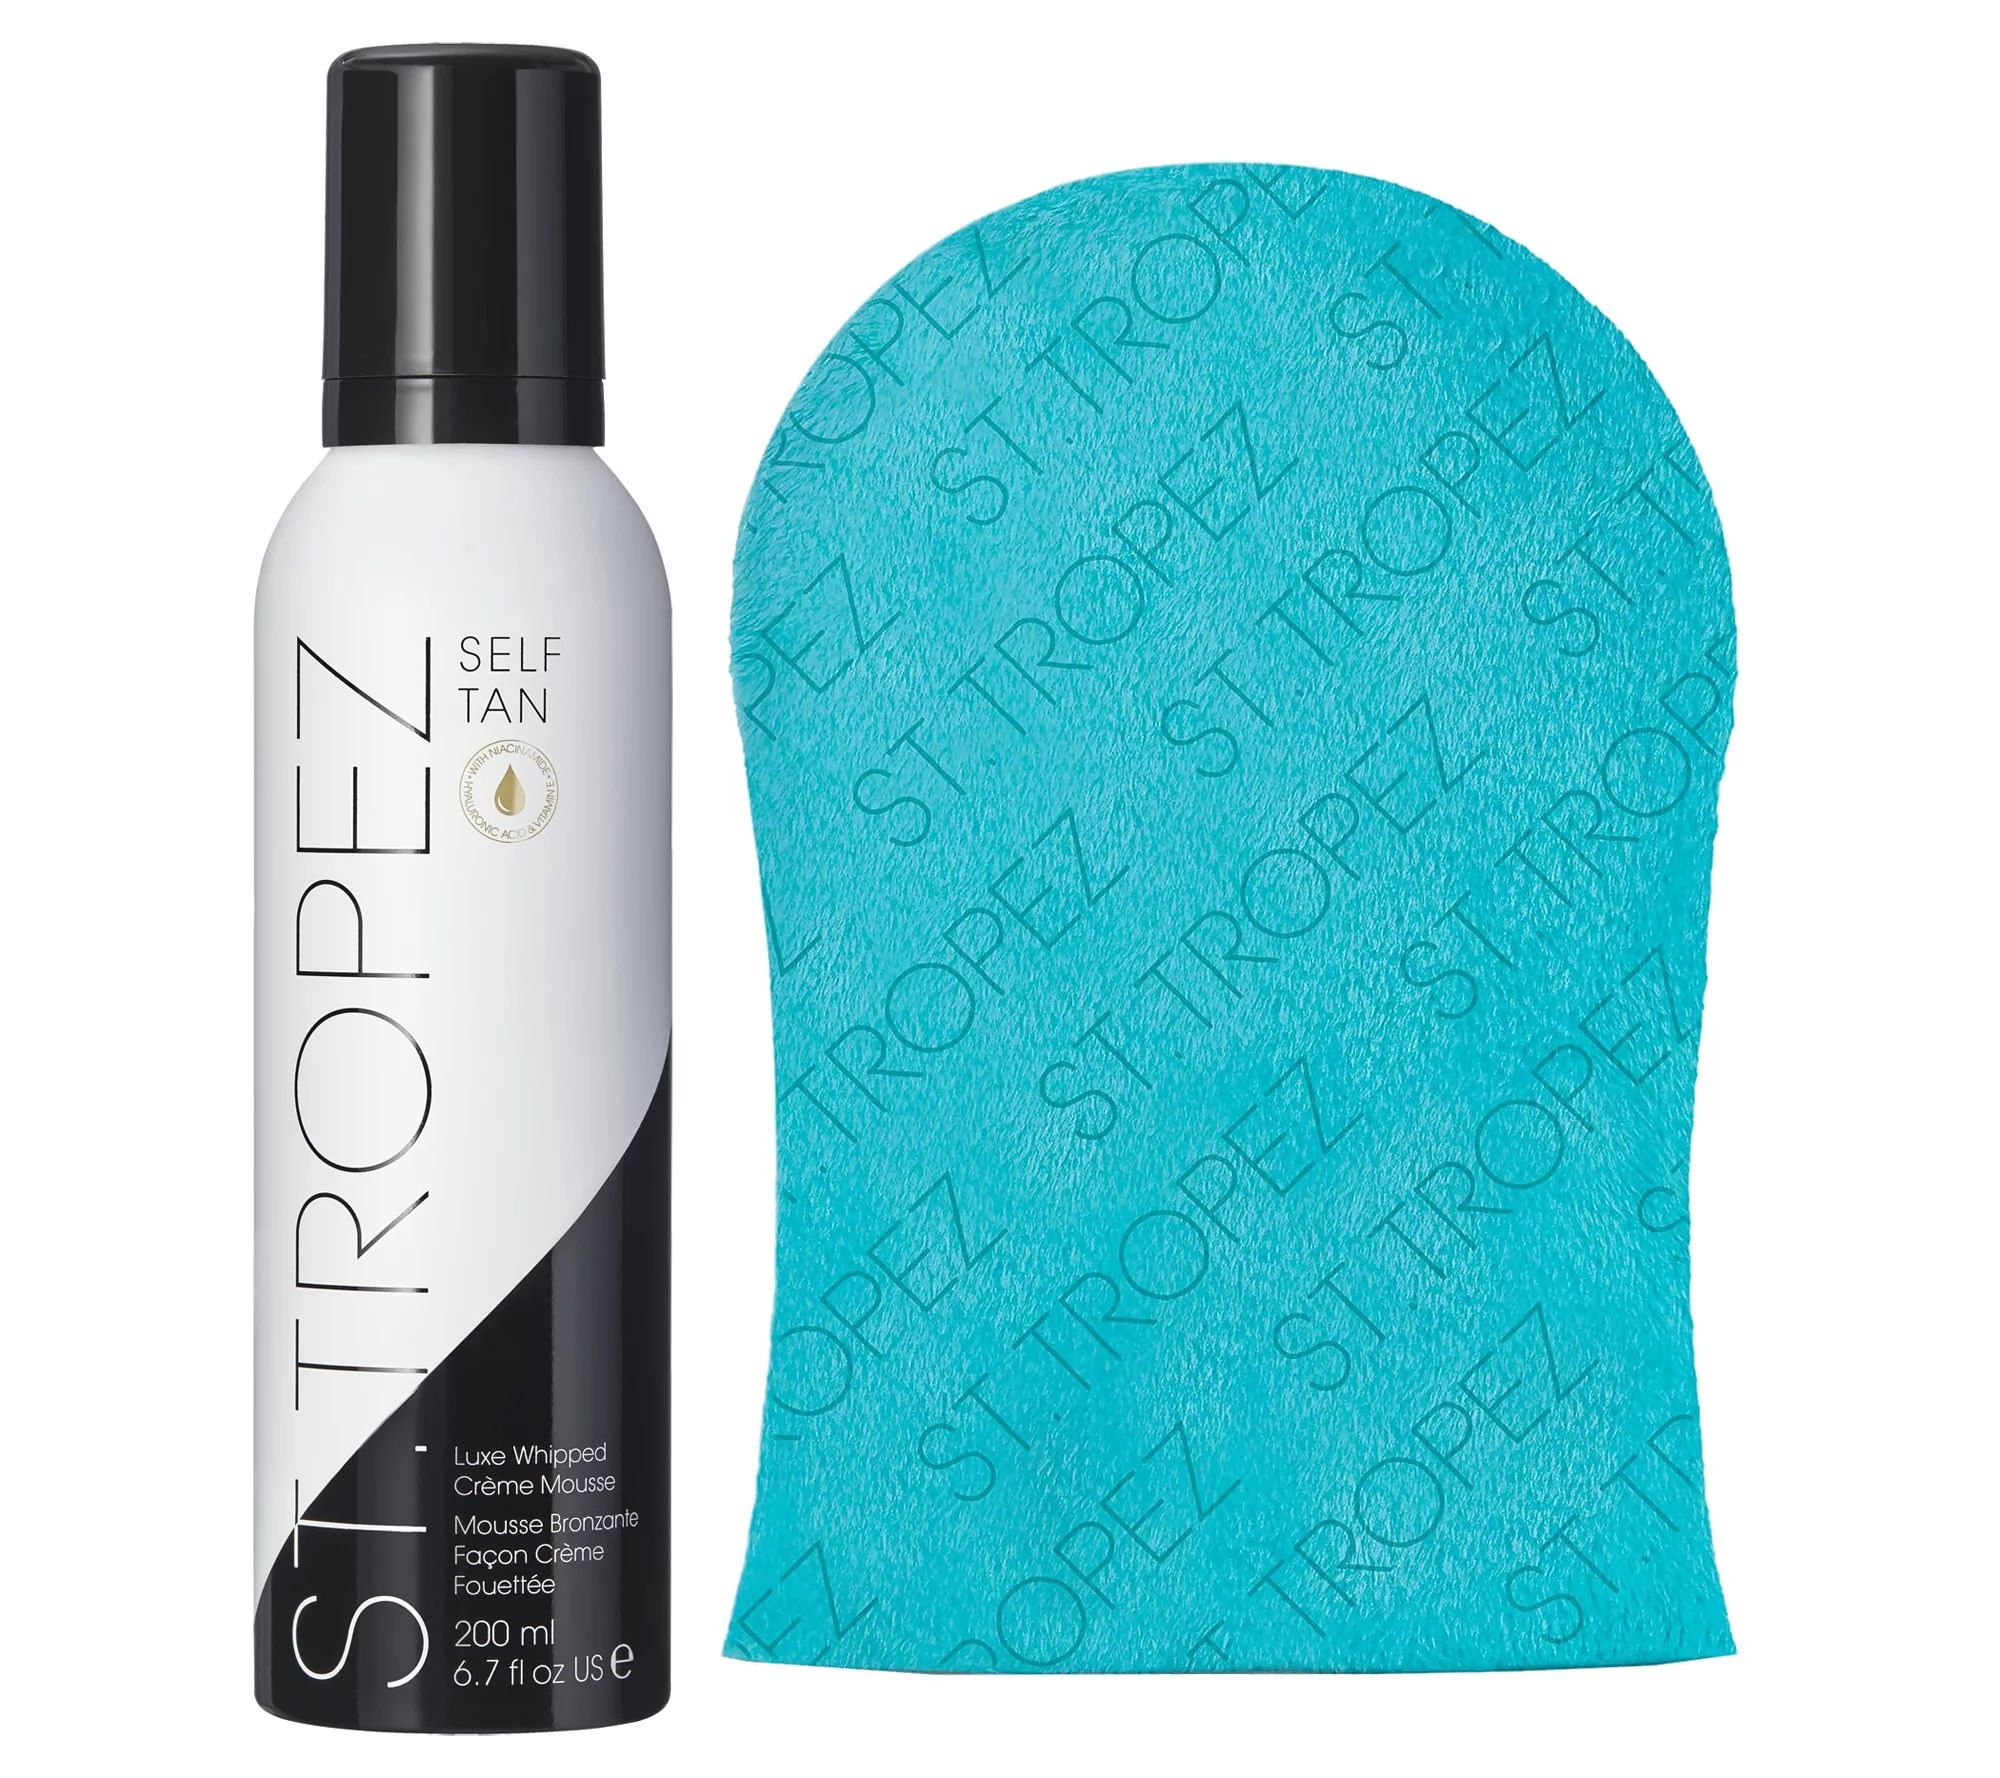 St. Tropez Self Tan Luxe Whipped Creme Mousse with Mitt - QVC.com | QVC